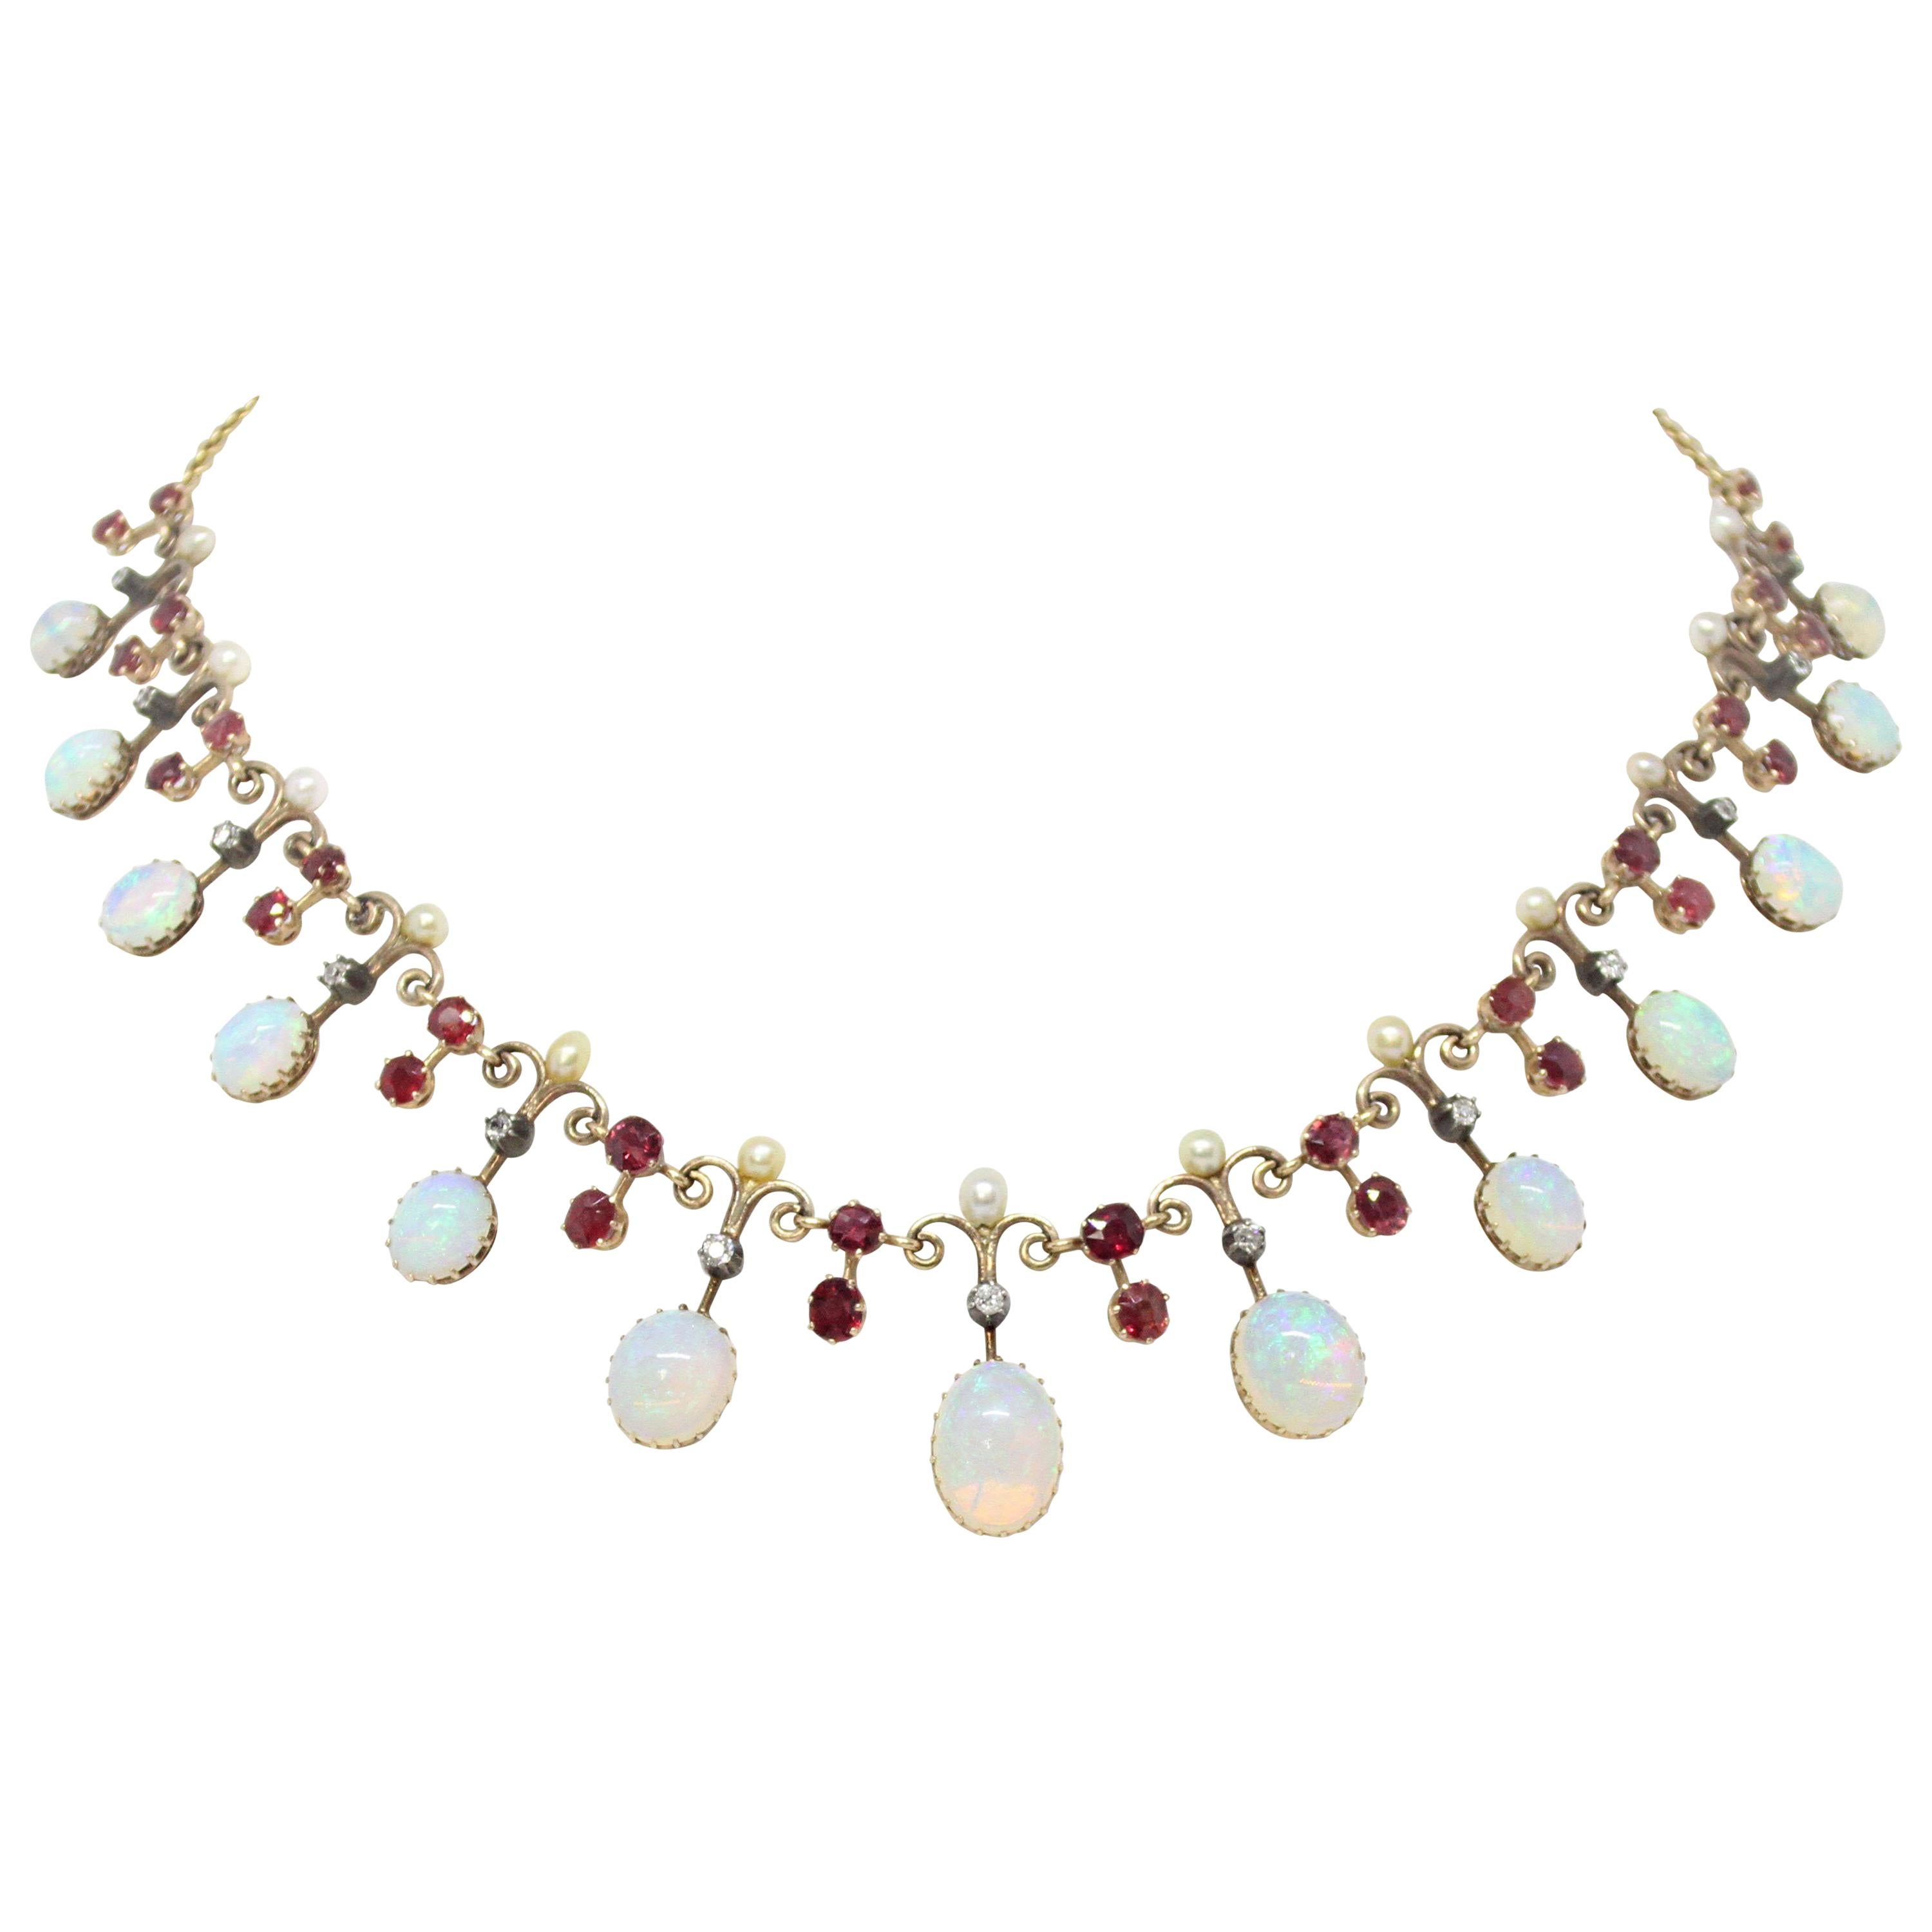 Antique Victorian Opal and Ruby Necklace, circa 1890s